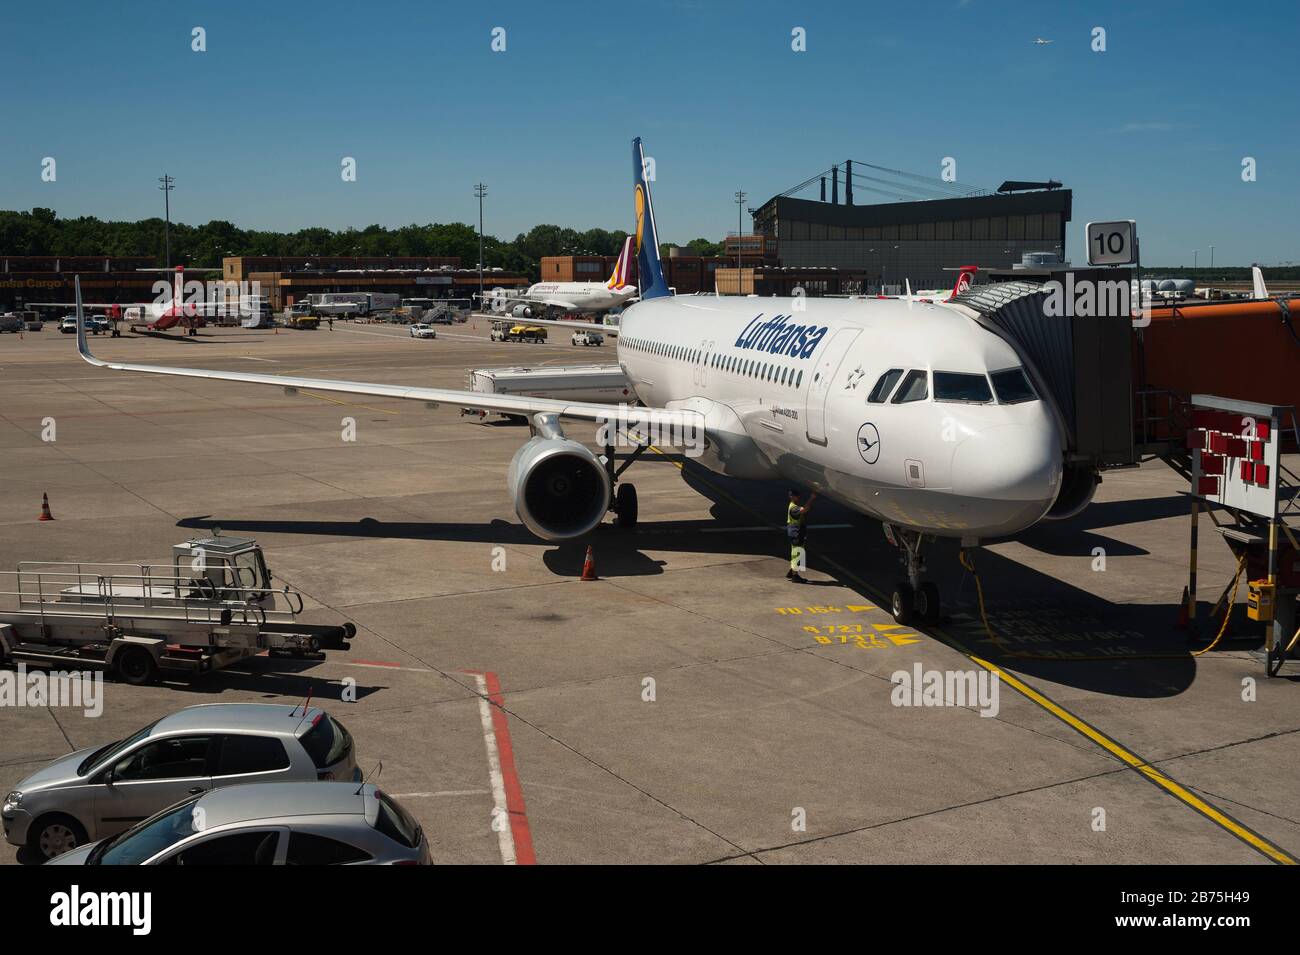 02.06.2017, Berlin, Germany, Europe - A Lufthansa passenger aircraft is parked at a gate at Berlin's Tegel Airport. Lufthansa is a member of the Star Alliance, an international network of airlines. [automated translation] Stock Photo